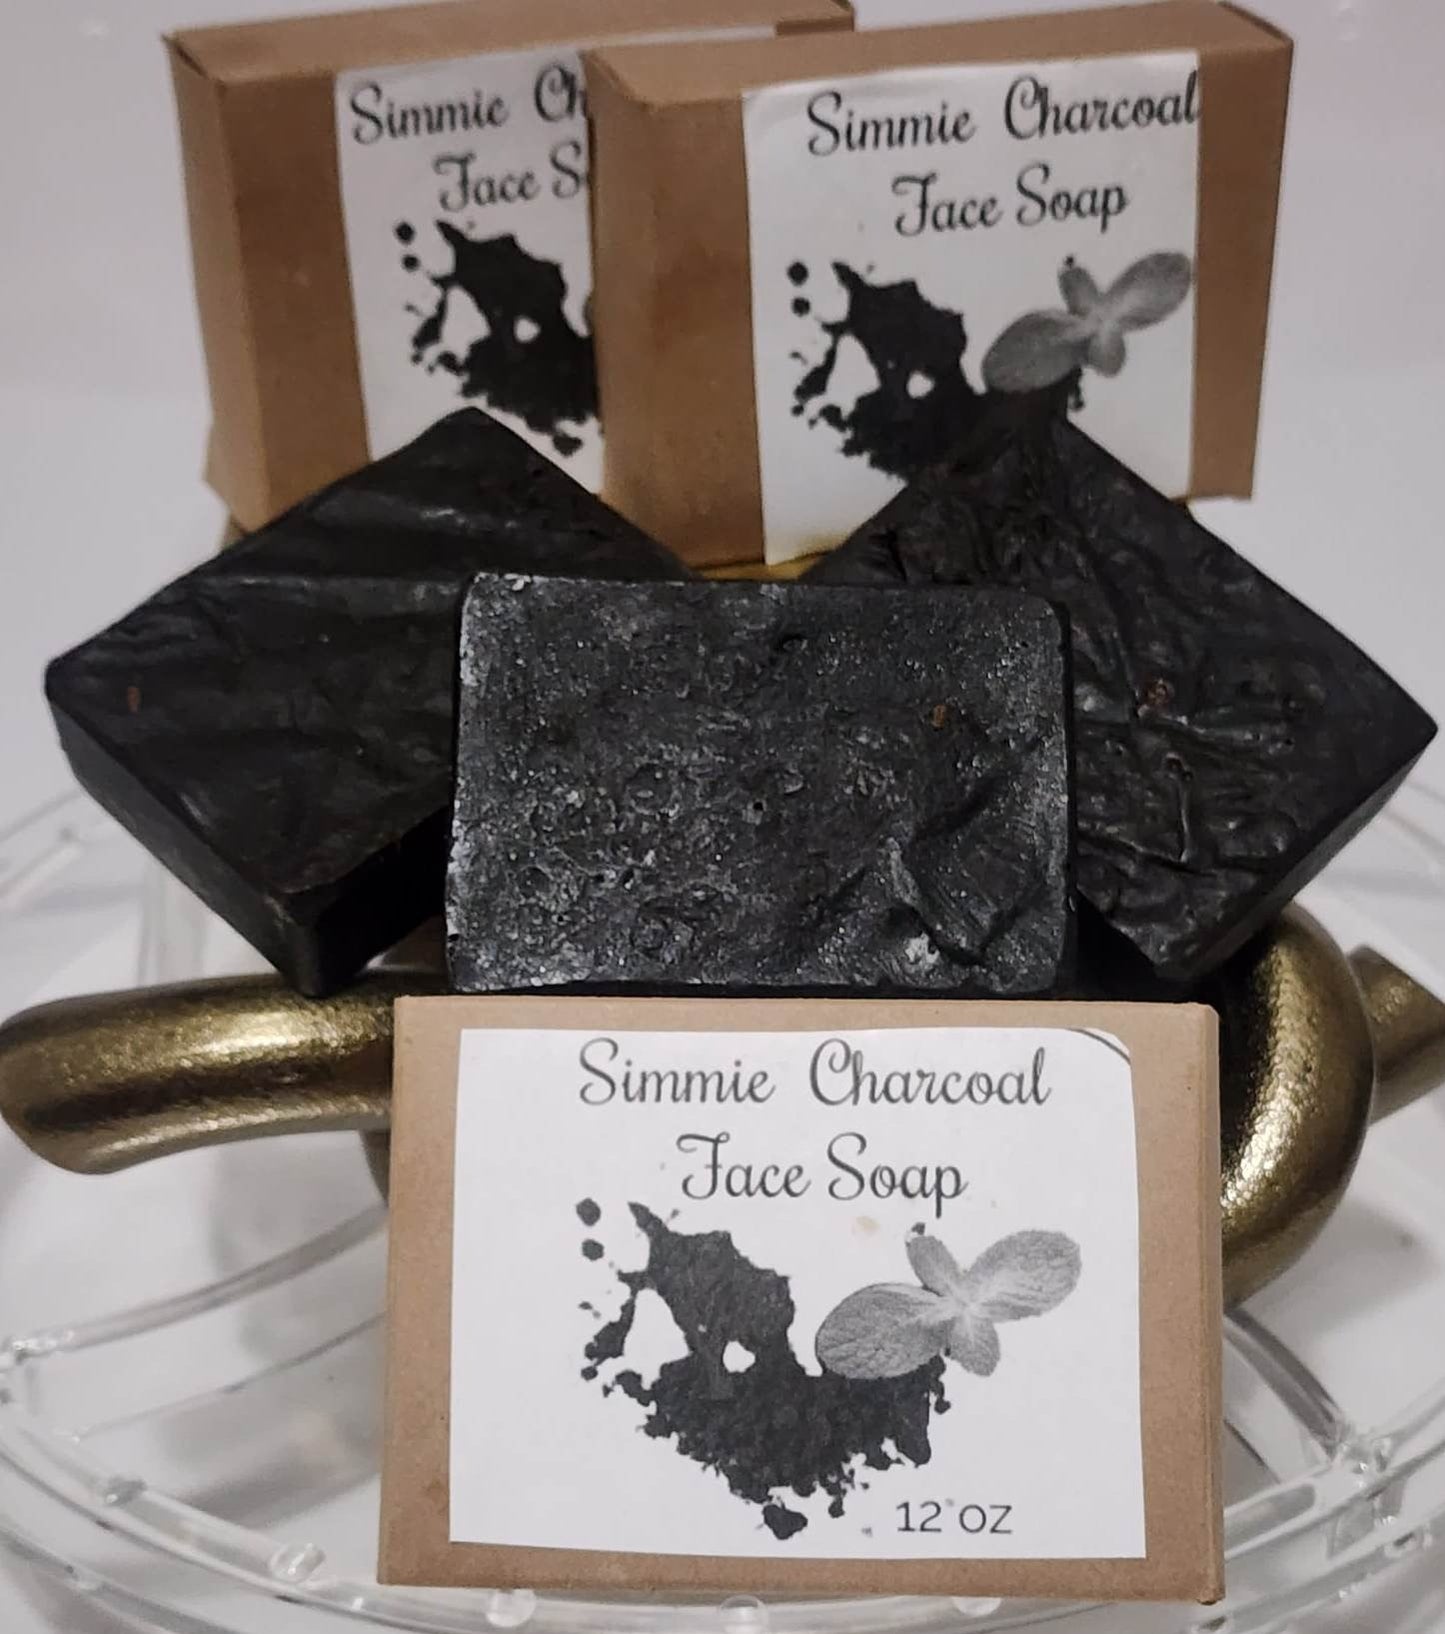 Simmie Charcoal Face Soap